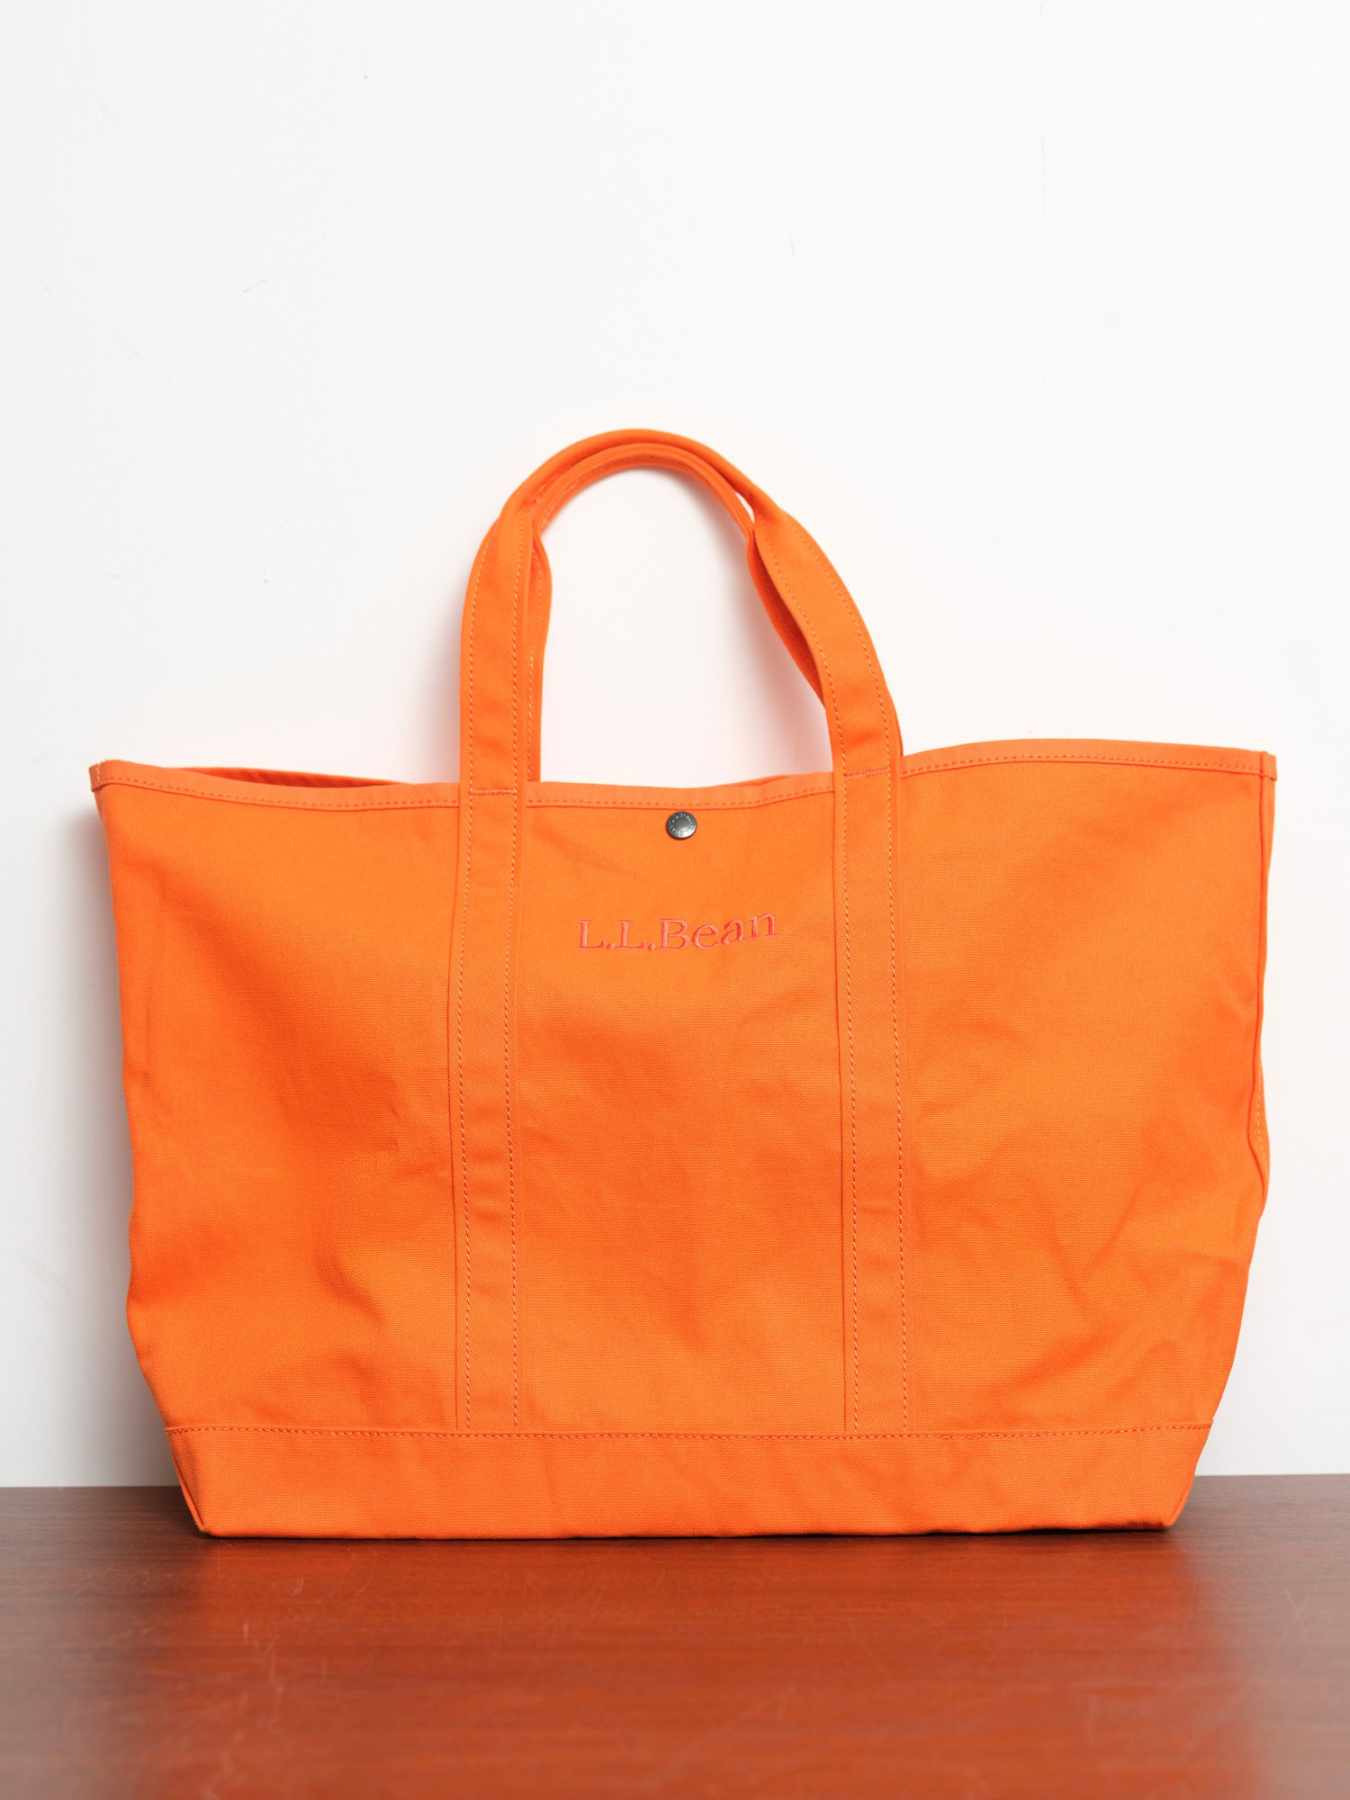 LL Bean's Beautiful Pastel Tote Bags Are Sadly Hard to Get